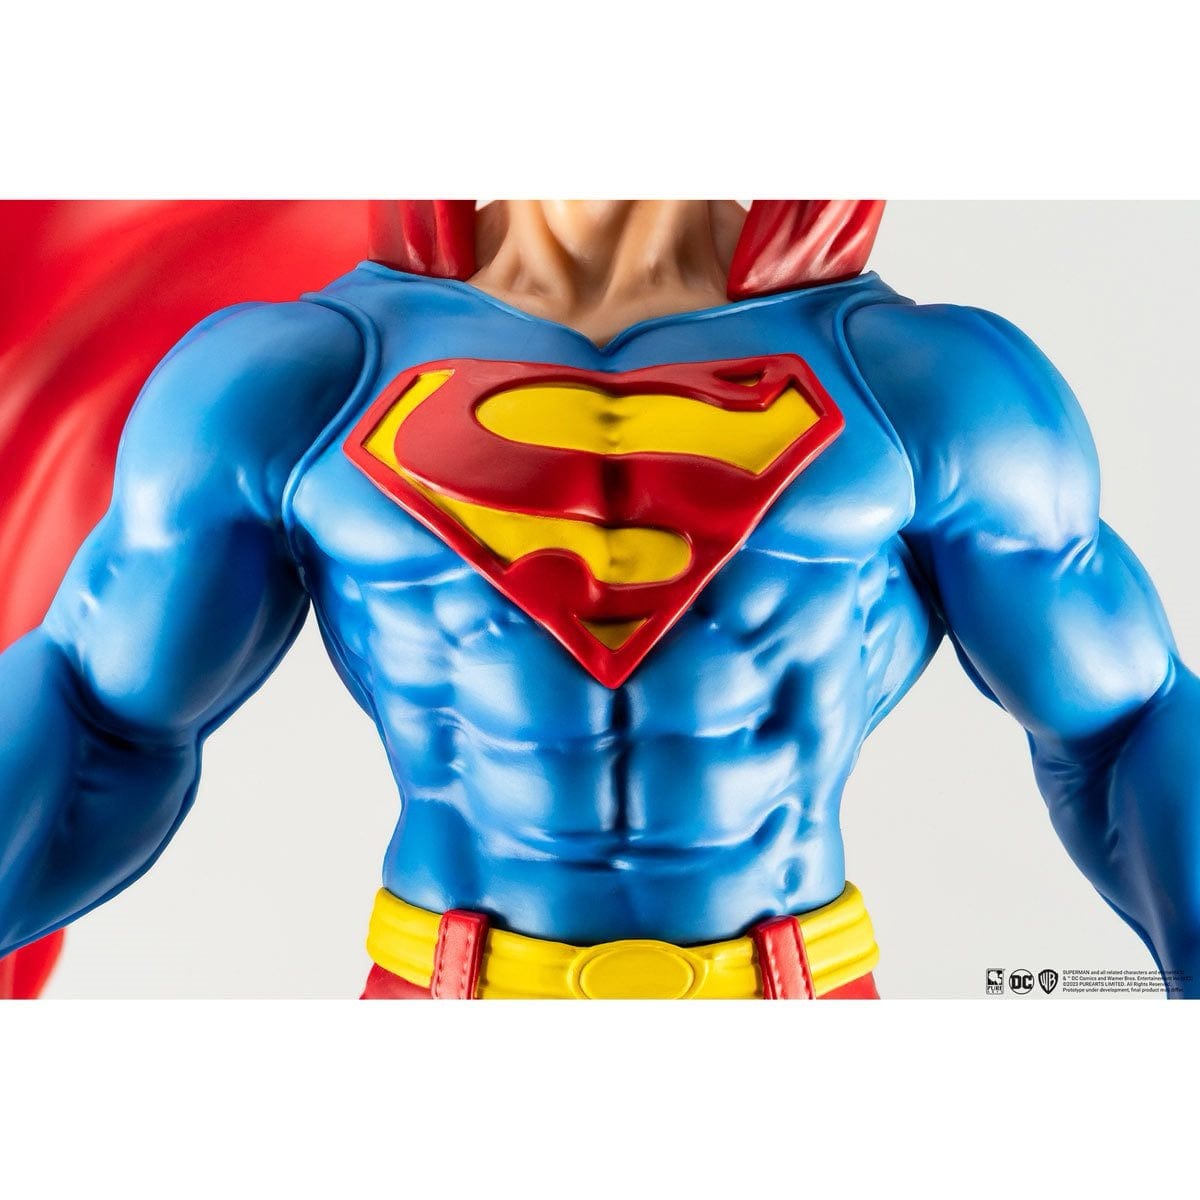 Pure Arts Limited DC Heroes Superman Classic Version 1:8 Scale Statue (Previews Exclusive)